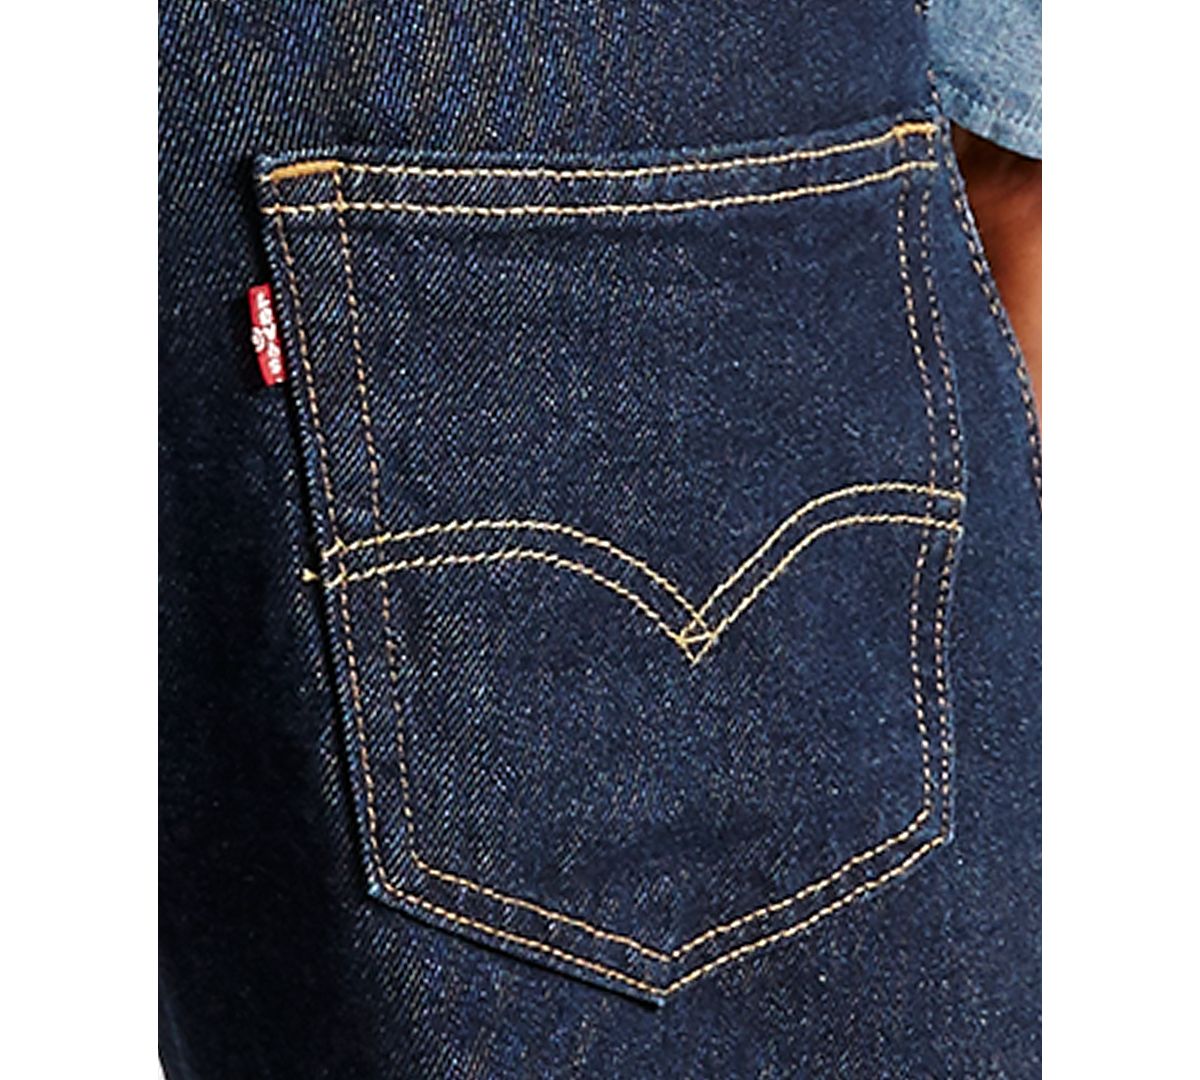 Levi's Big & Tall 550 Relaxed Fit Jeans Rinse